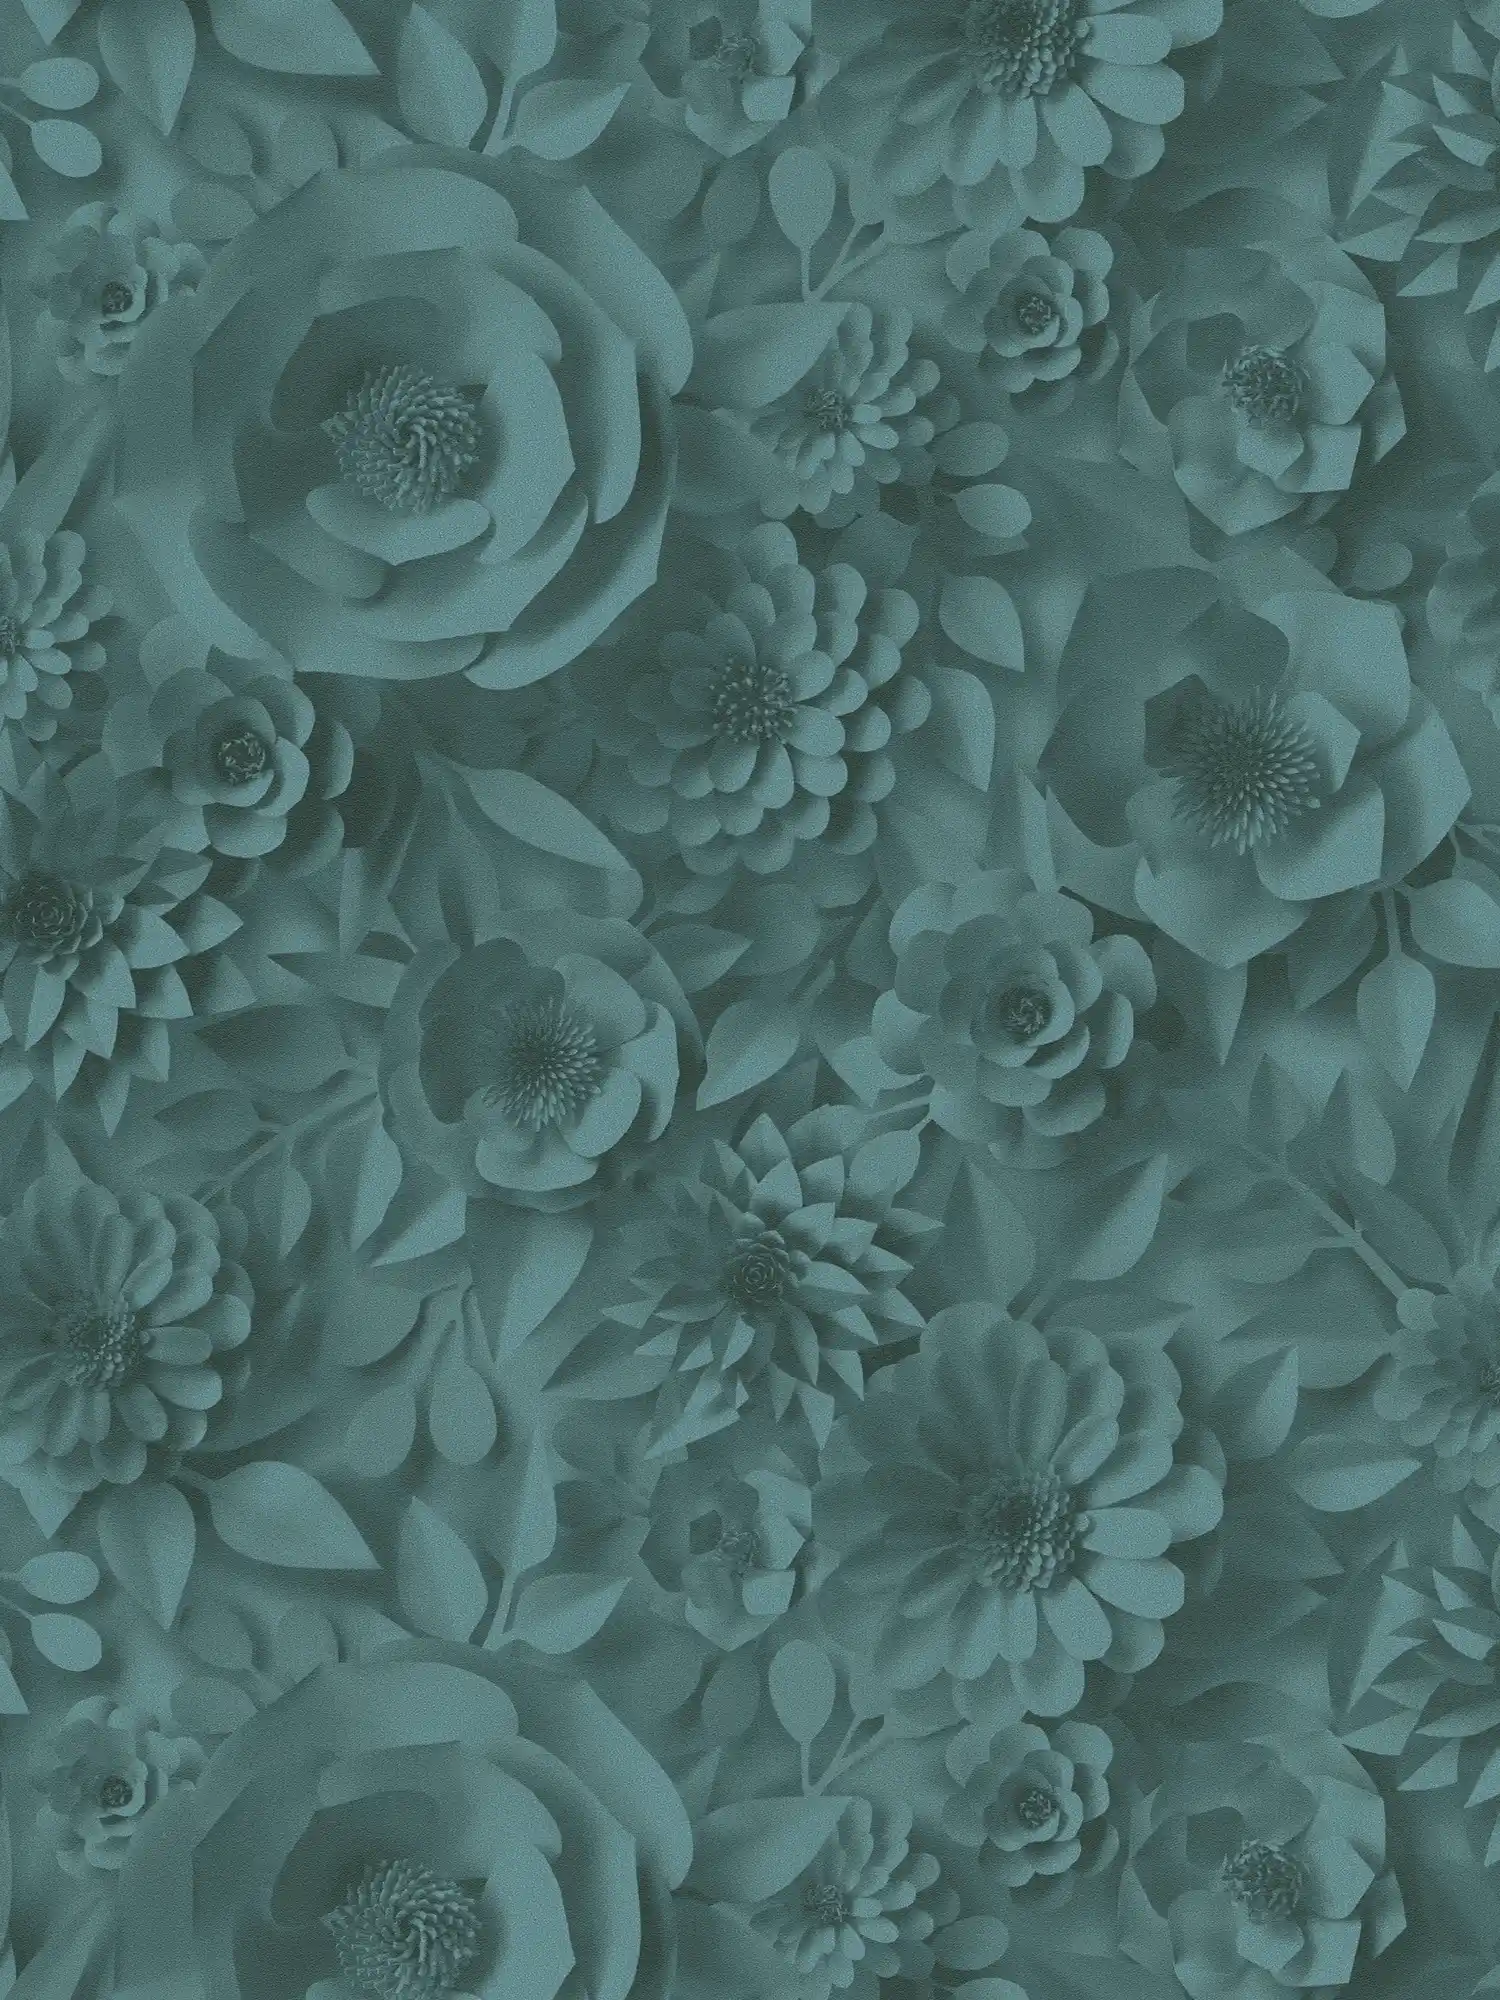 3D wallpaper with paper flowers, graphic floral pattern - green
